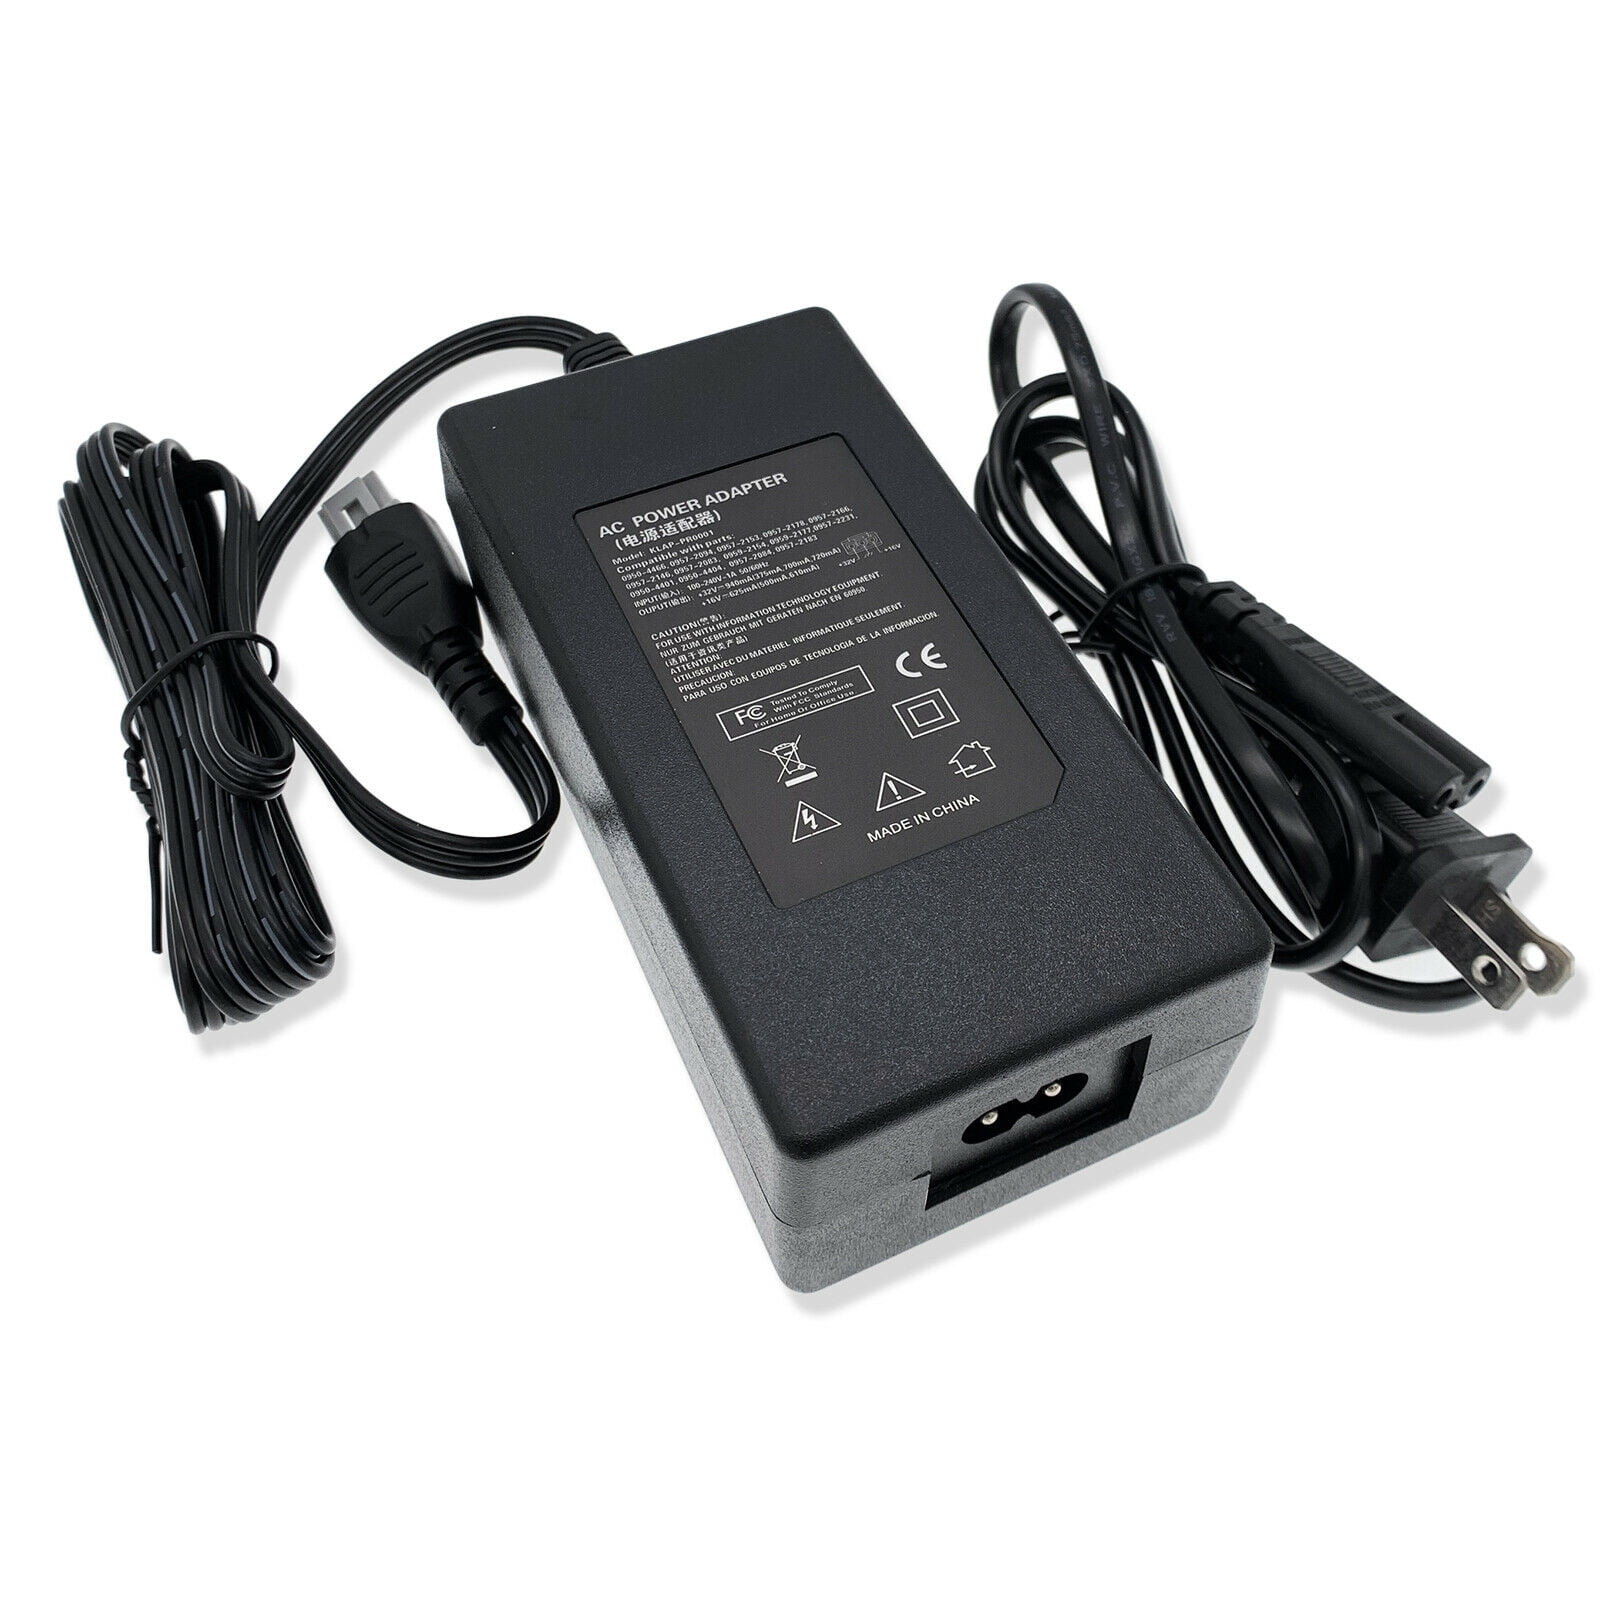 AC Adapter For HP PSC 1610xi 1610V 1600 1603 1618 1315 All-in-One Power Charger 